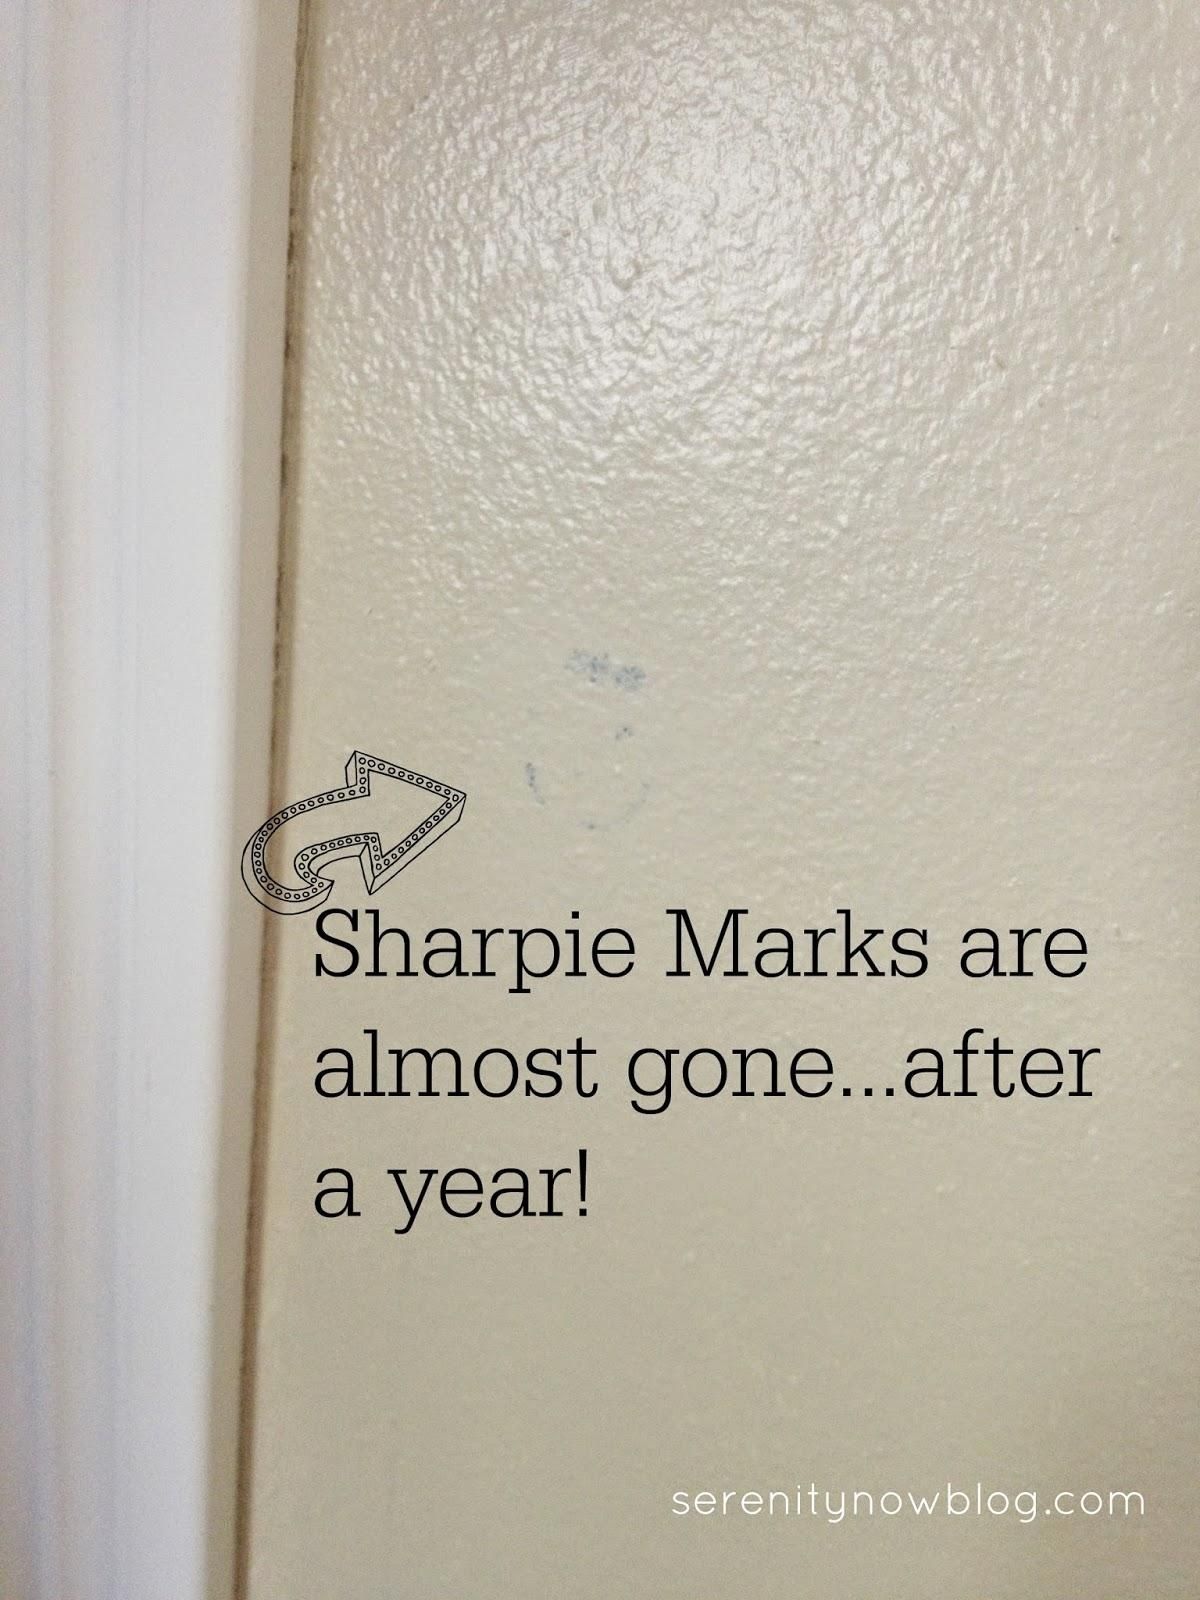 Serenity Now: How To Get Sharpie Marker Out Of Wood Or Off The Throughout Sharpie Wall Art (View 15 of 20)